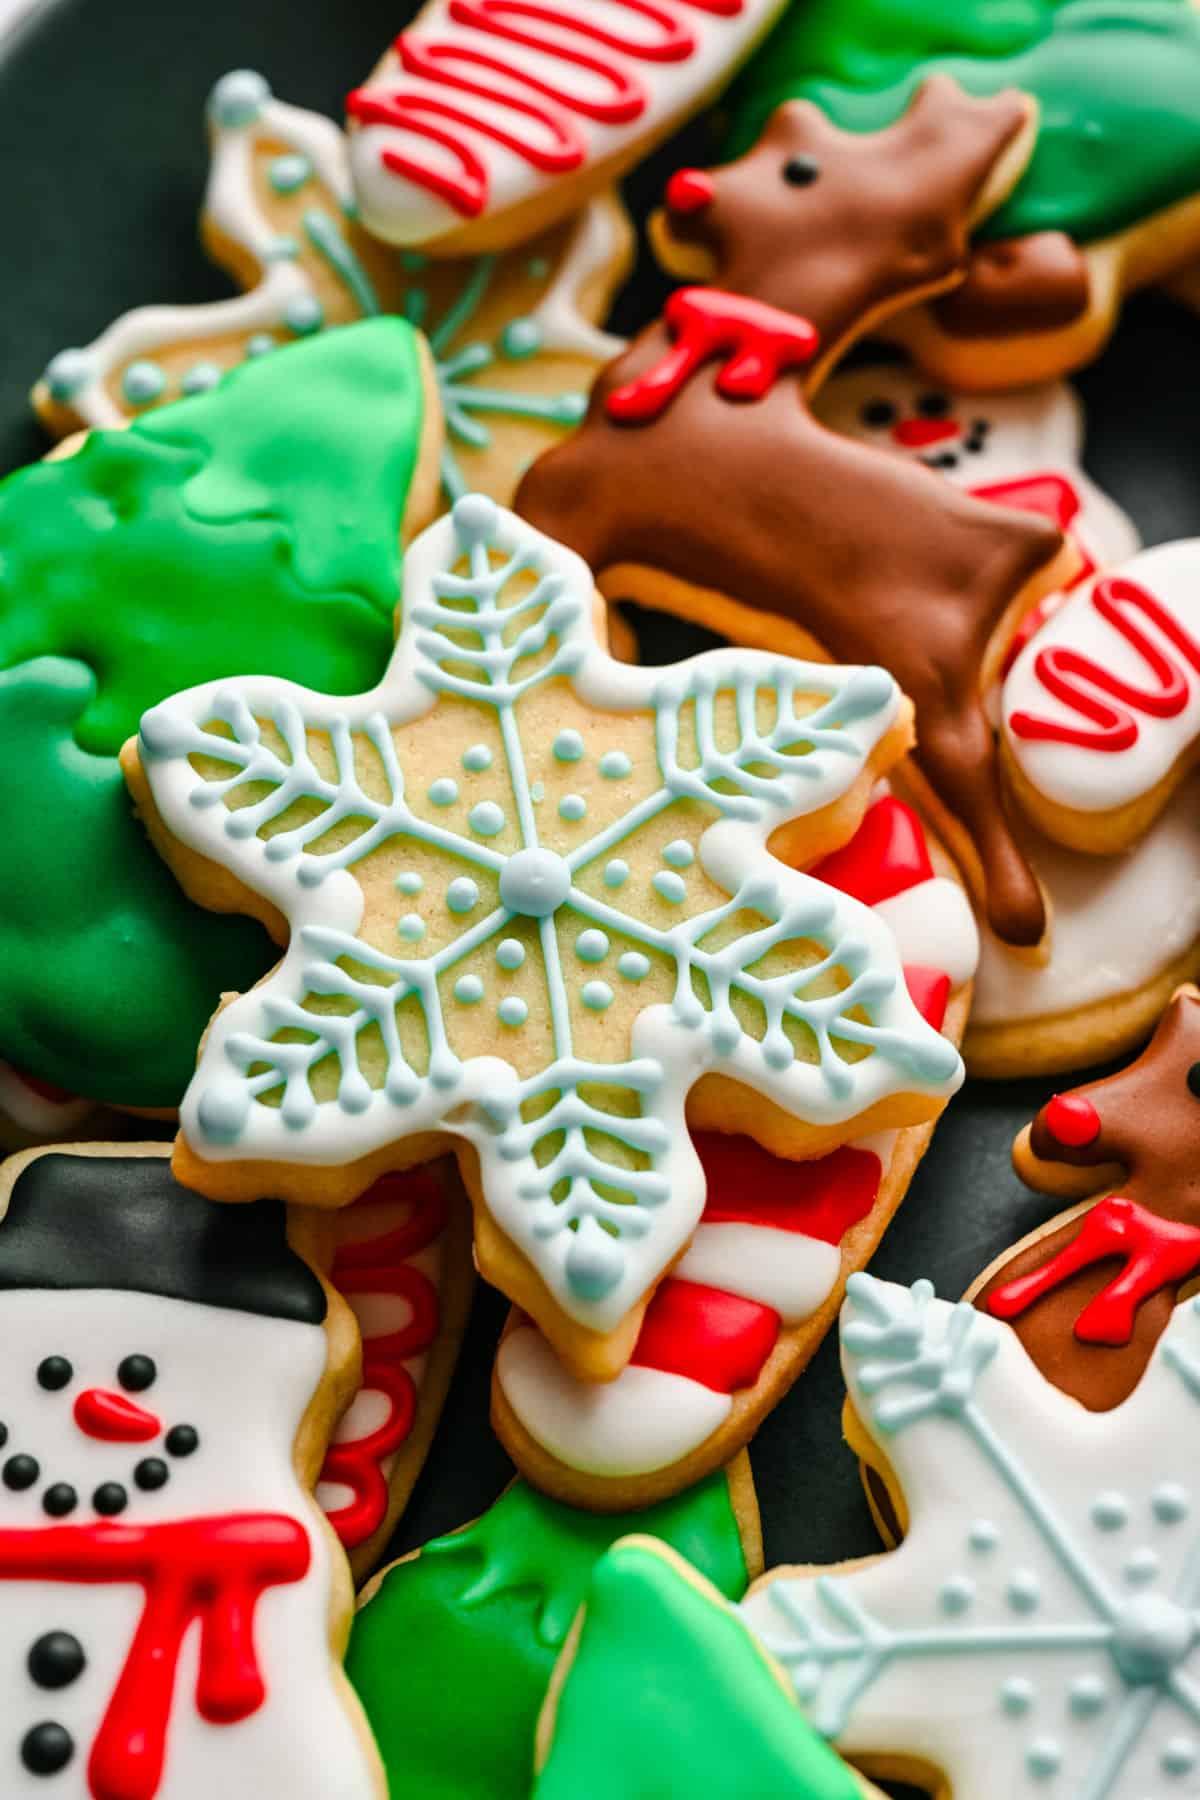 A snowflake cut out sugar cookie on top of other decorated sugar cookies.